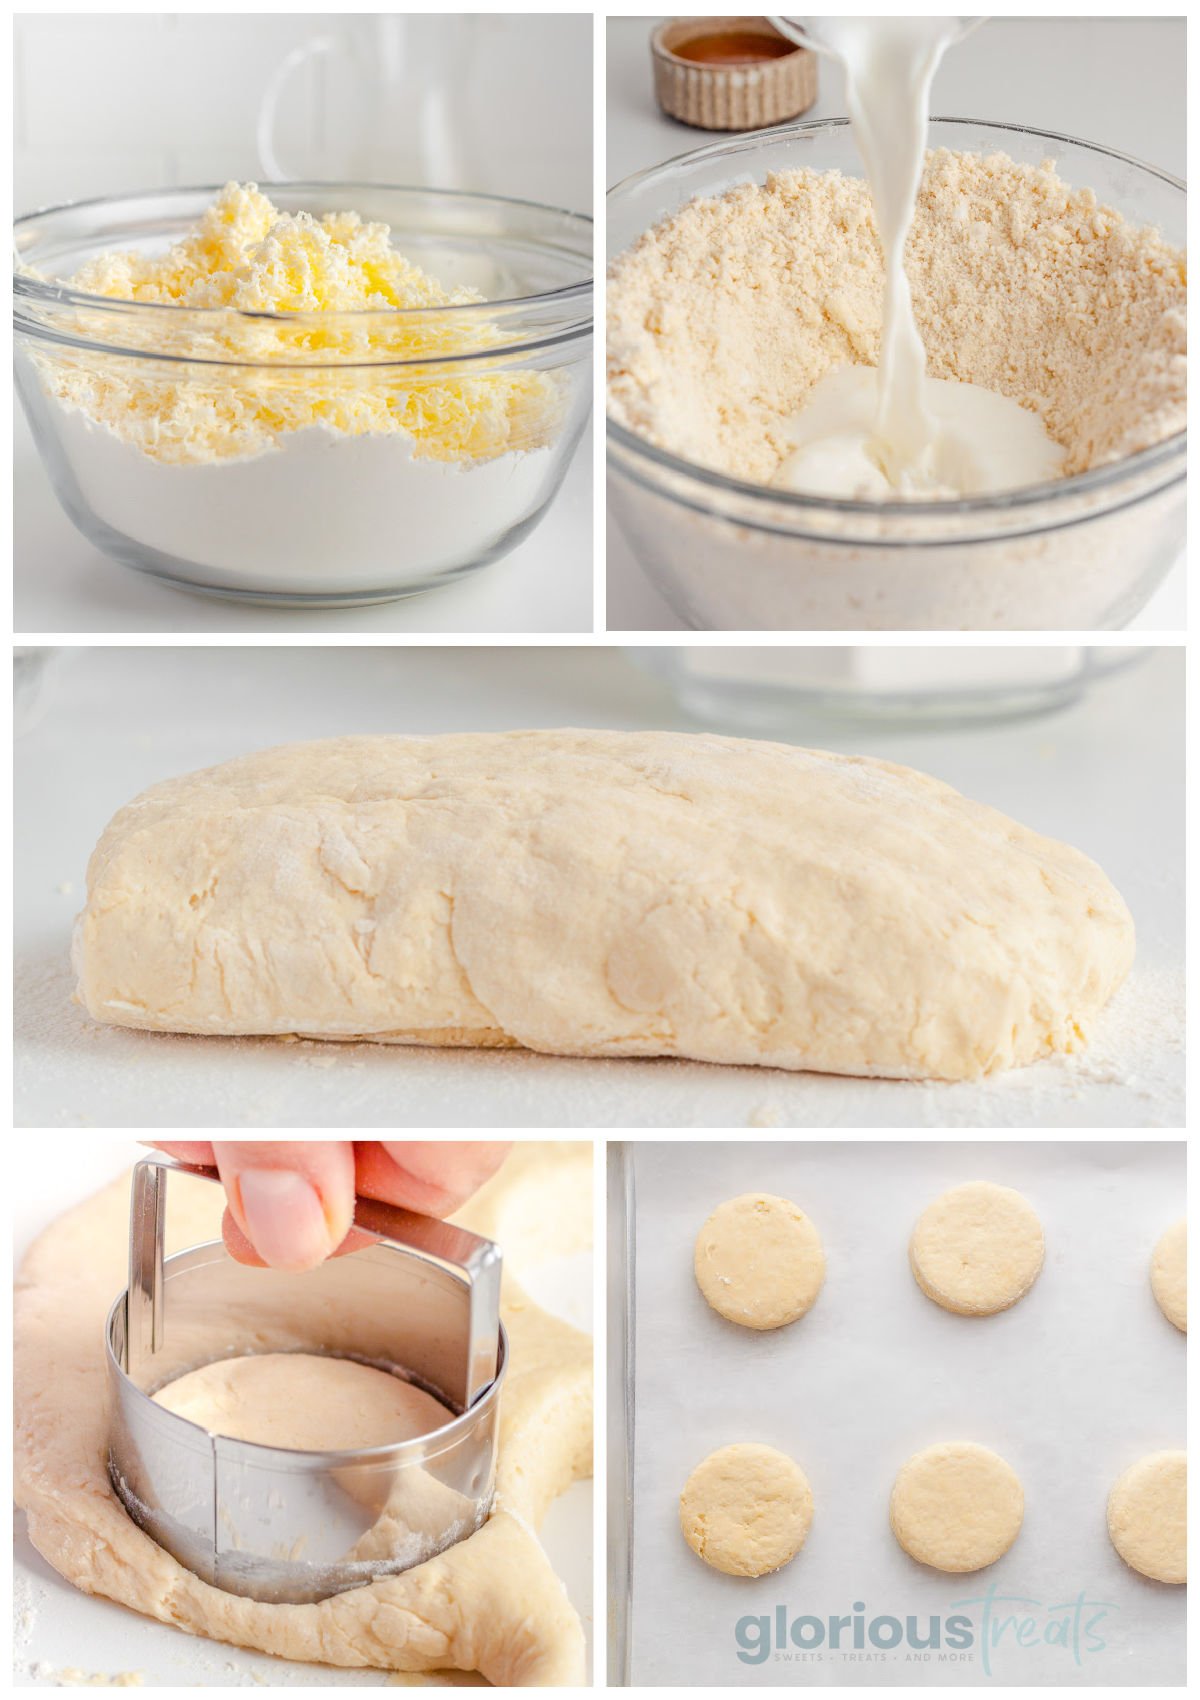 five image collage showing how to make buttermilk biscuits.